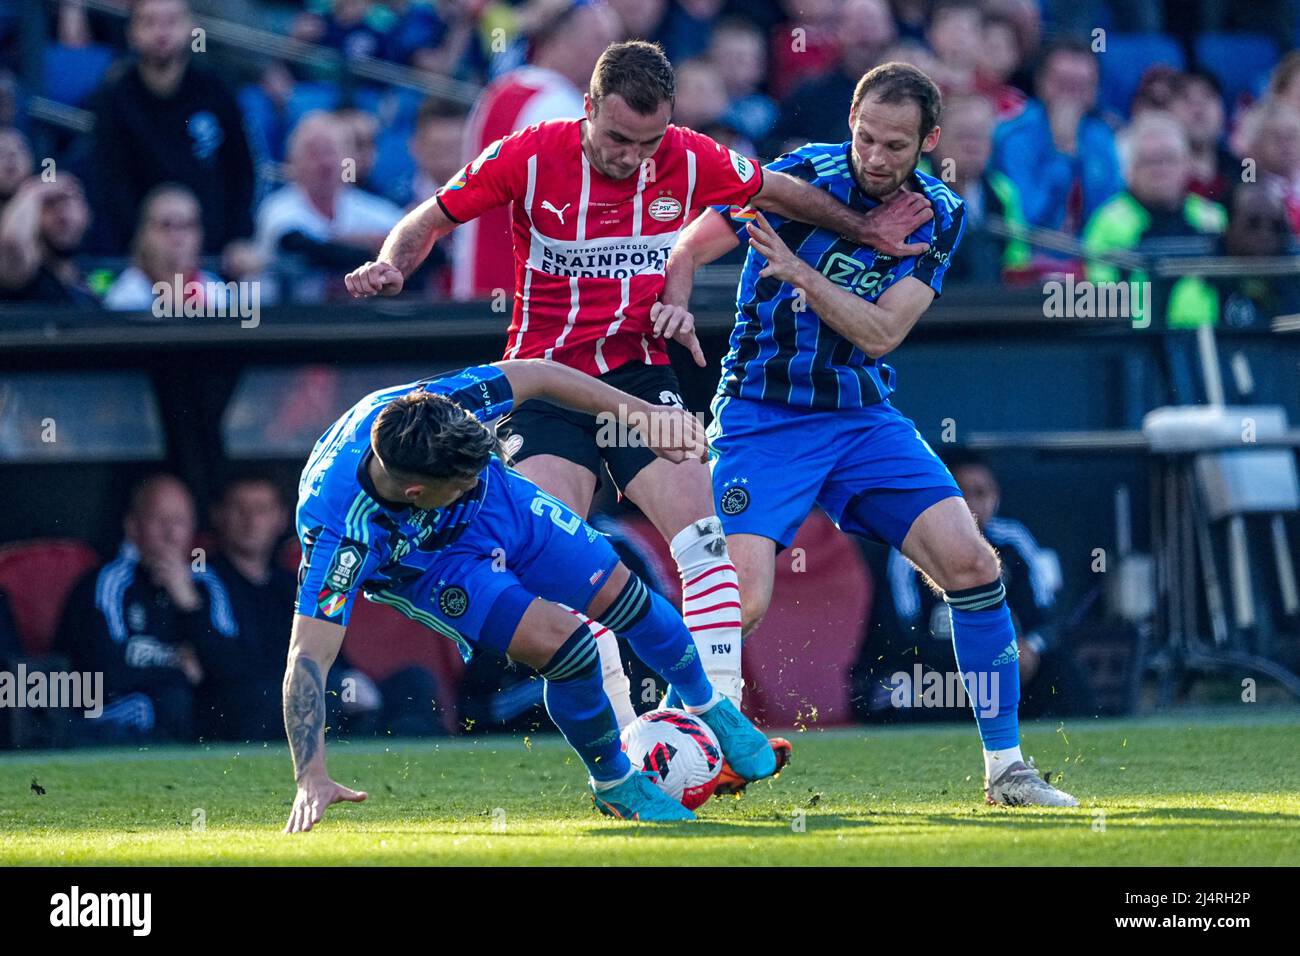 ROTTERDAM, NETHERLANDS - APRIL 17: Lisandro Martinez of Ajax, Mario Gotze of PSV, Daley Blind of Ajax during the TOTO KNVB Cup Final match between PSV and Ajax at Stadion Feijenoord on April 17, 2022 in Rotterdam, Netherlands (Photo by Geert van Erven/Orange Pictures) Credit: Orange Pics BV/Alamy Live News Stock Photo